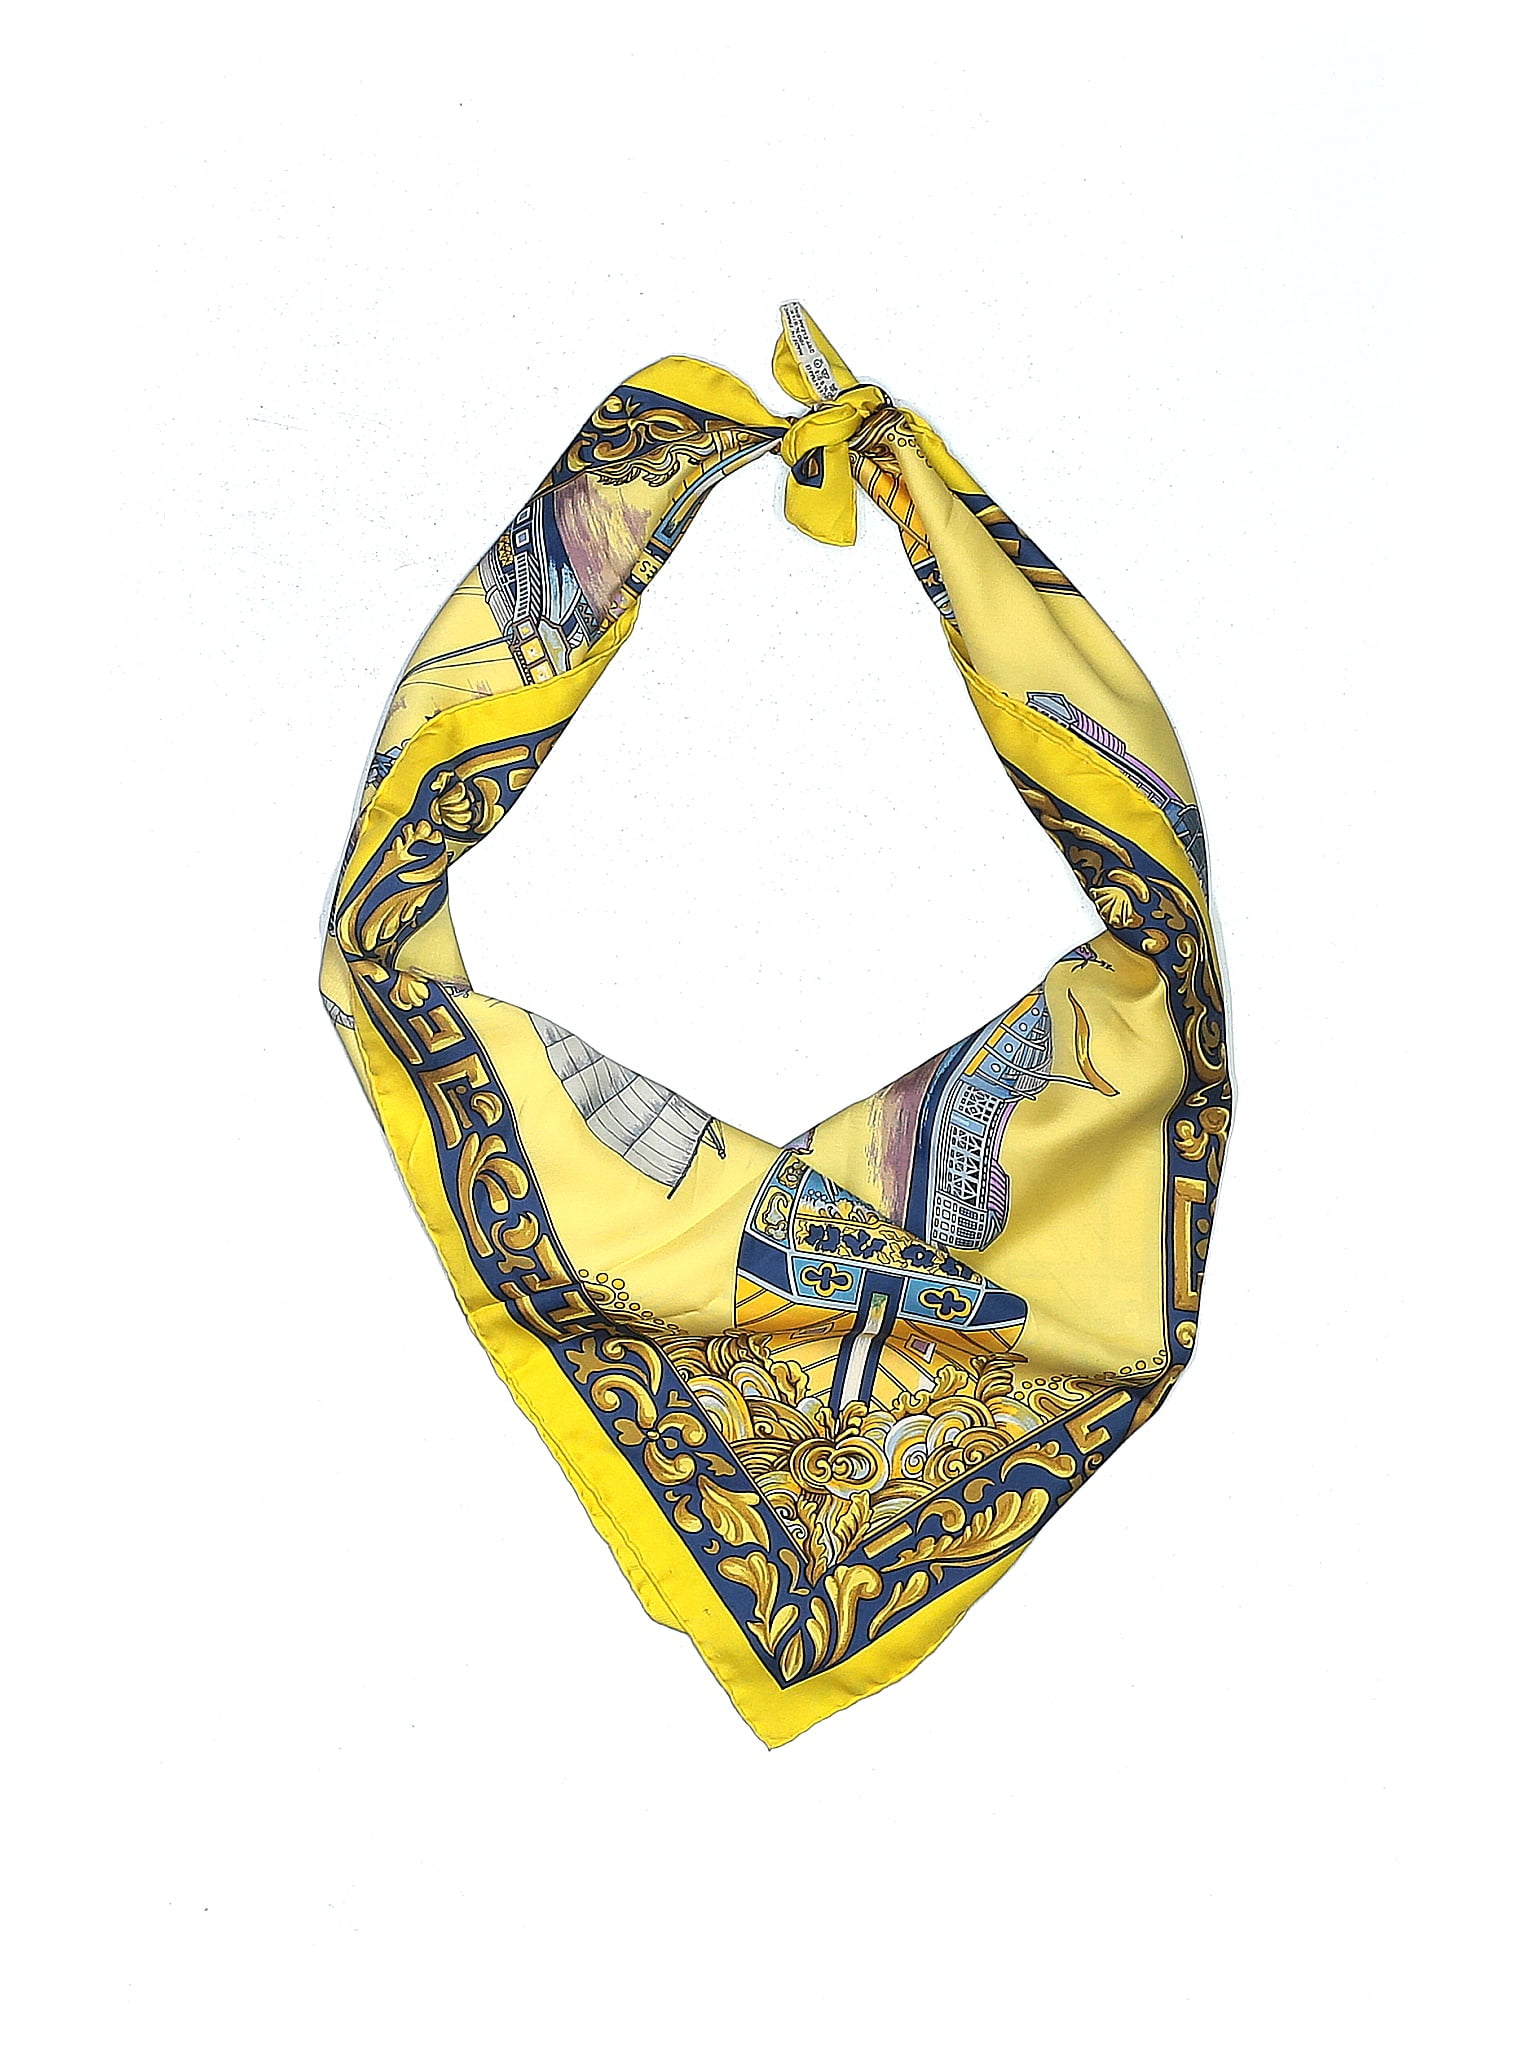 Check it out -- Louis Vuitton Silk Scarf for $279.99 on thredUP!